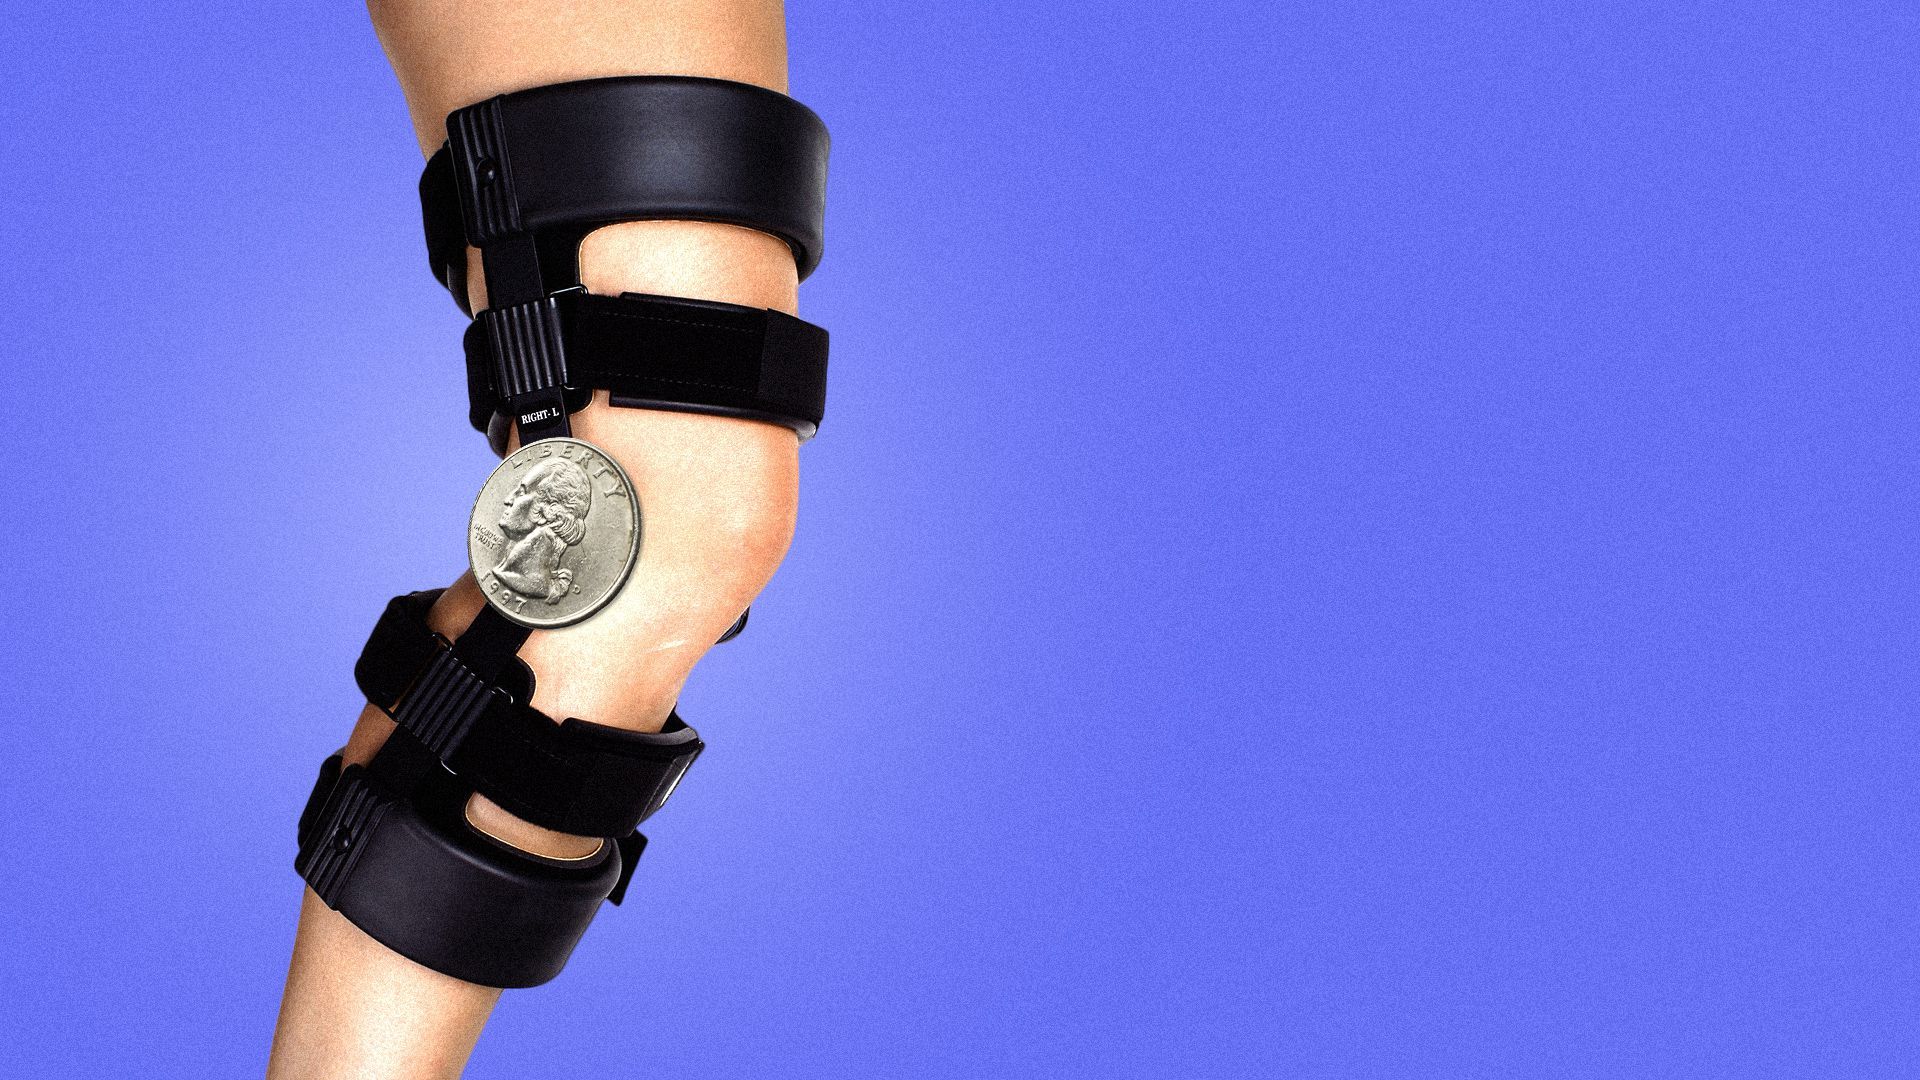 Illustration of a knee brace with the hinge made out of a quarter.